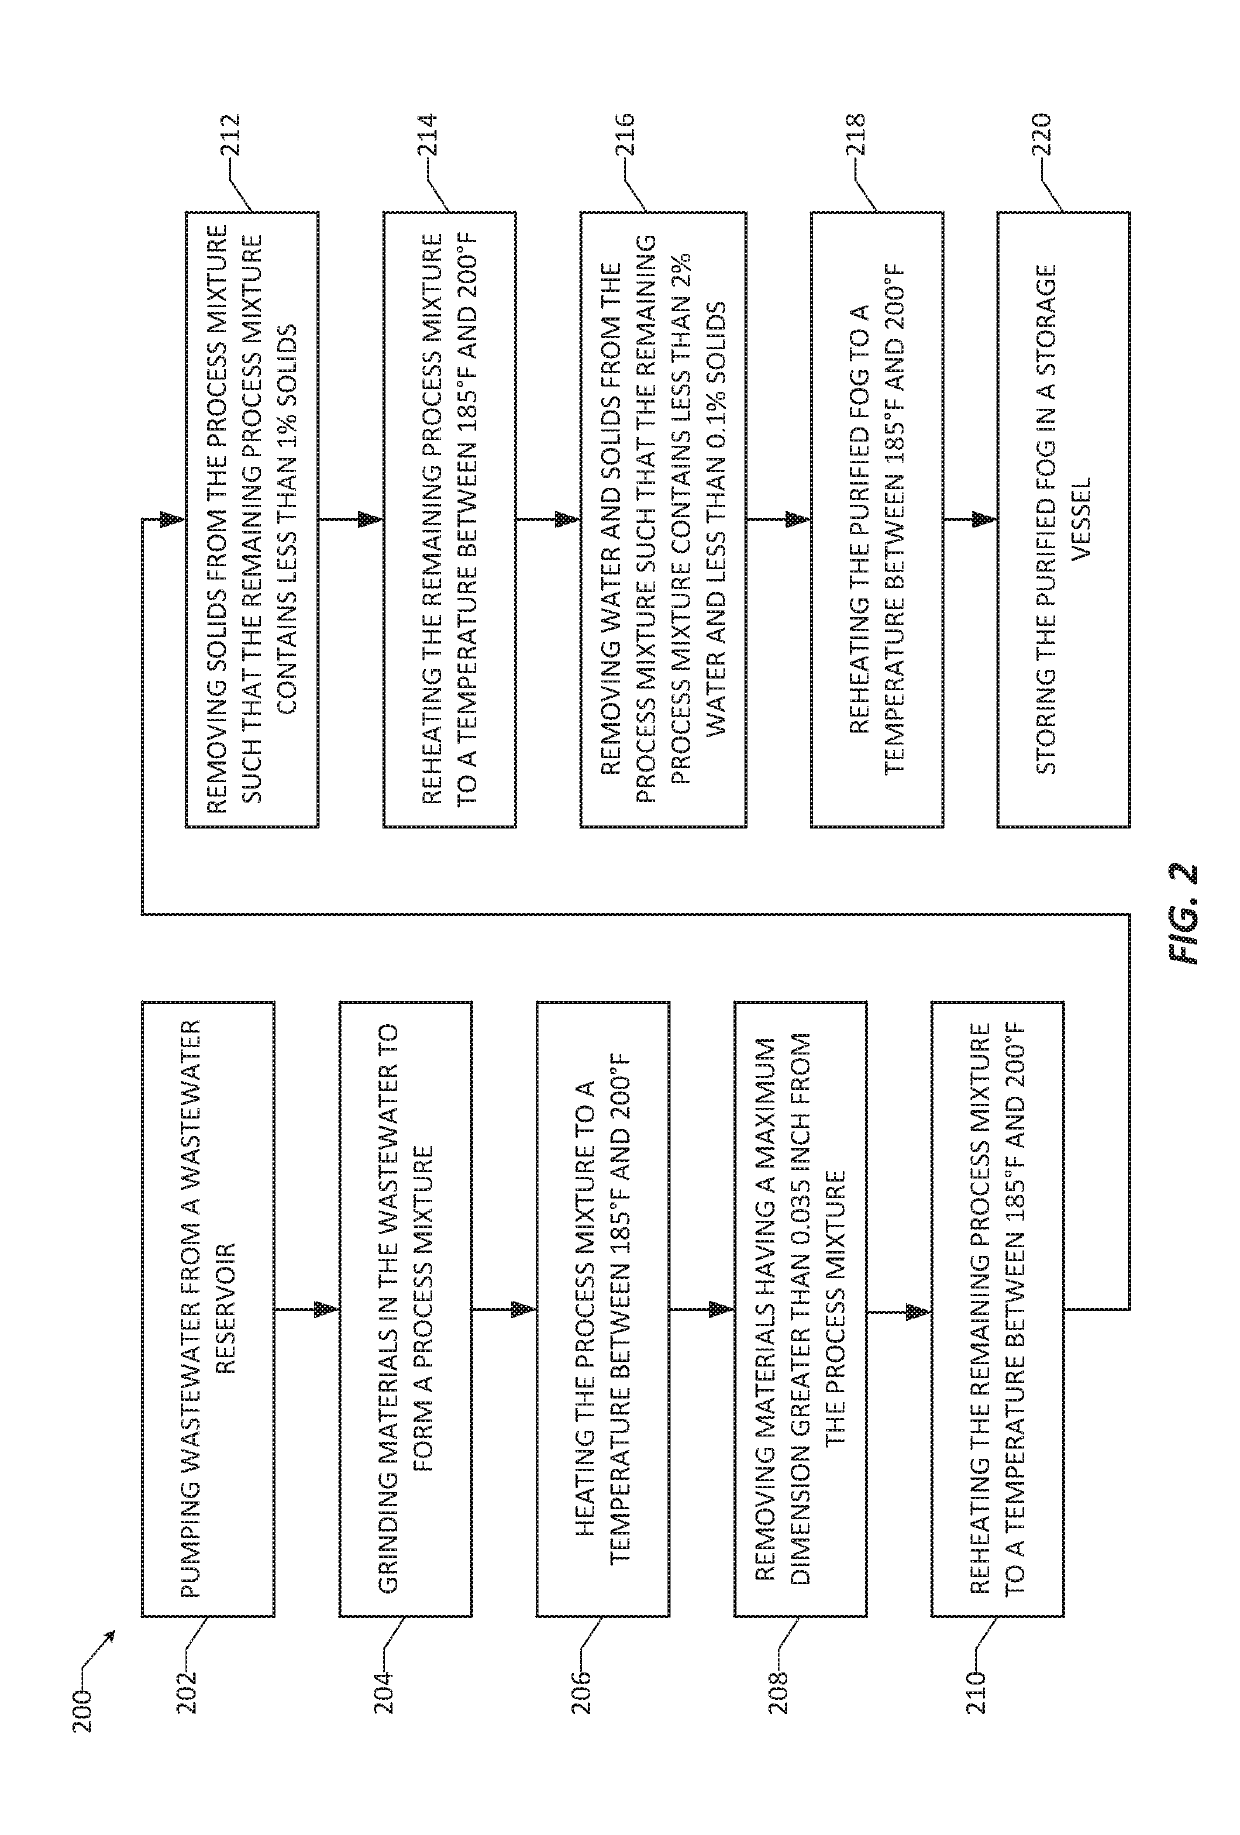 Systems and methods for purification of fats, oils, and grease from wastewater